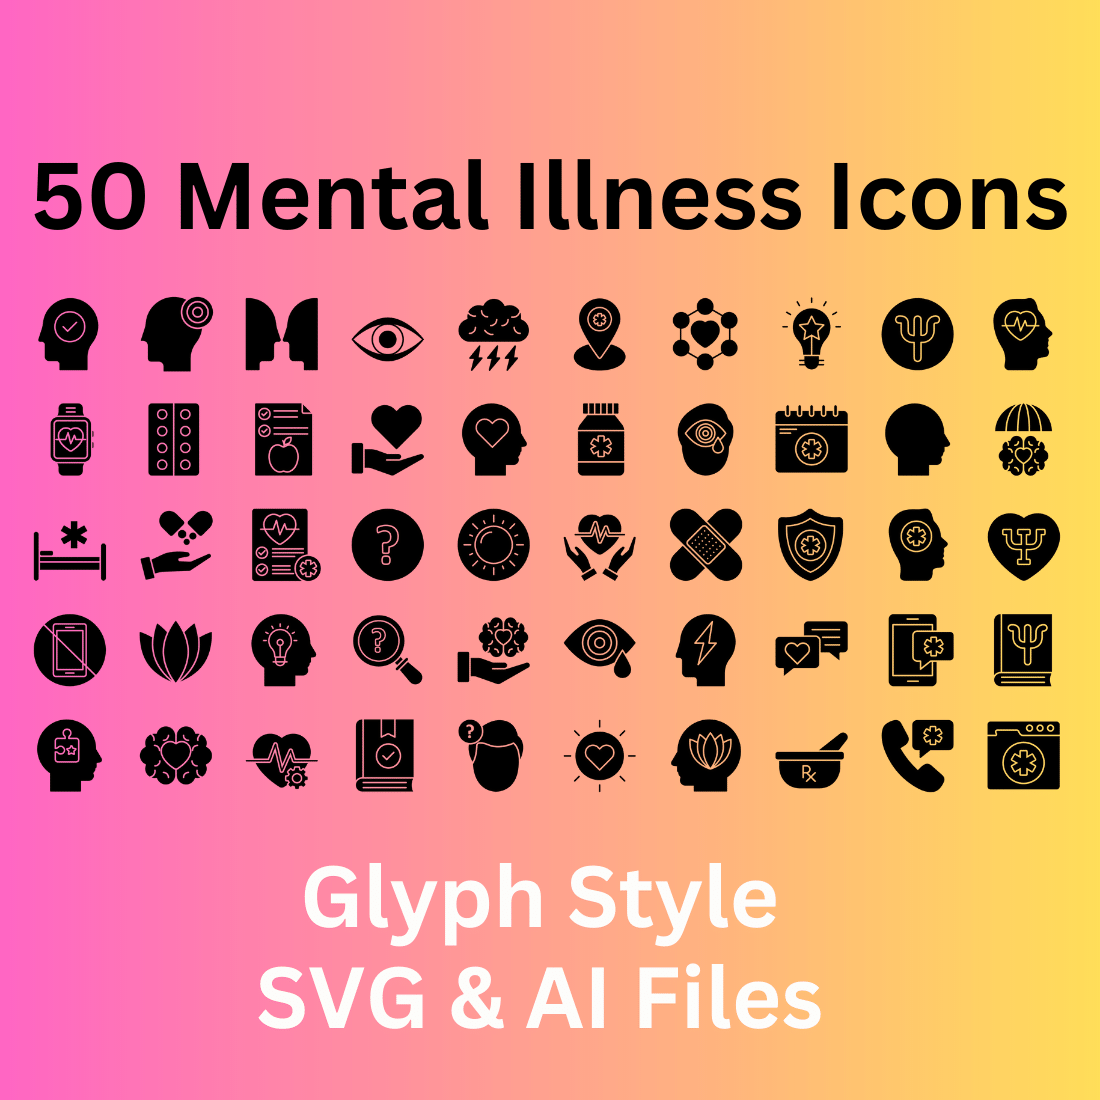 Mental Illness Icon Set 50 Glyph Icons - SVG And AI Files cover image.